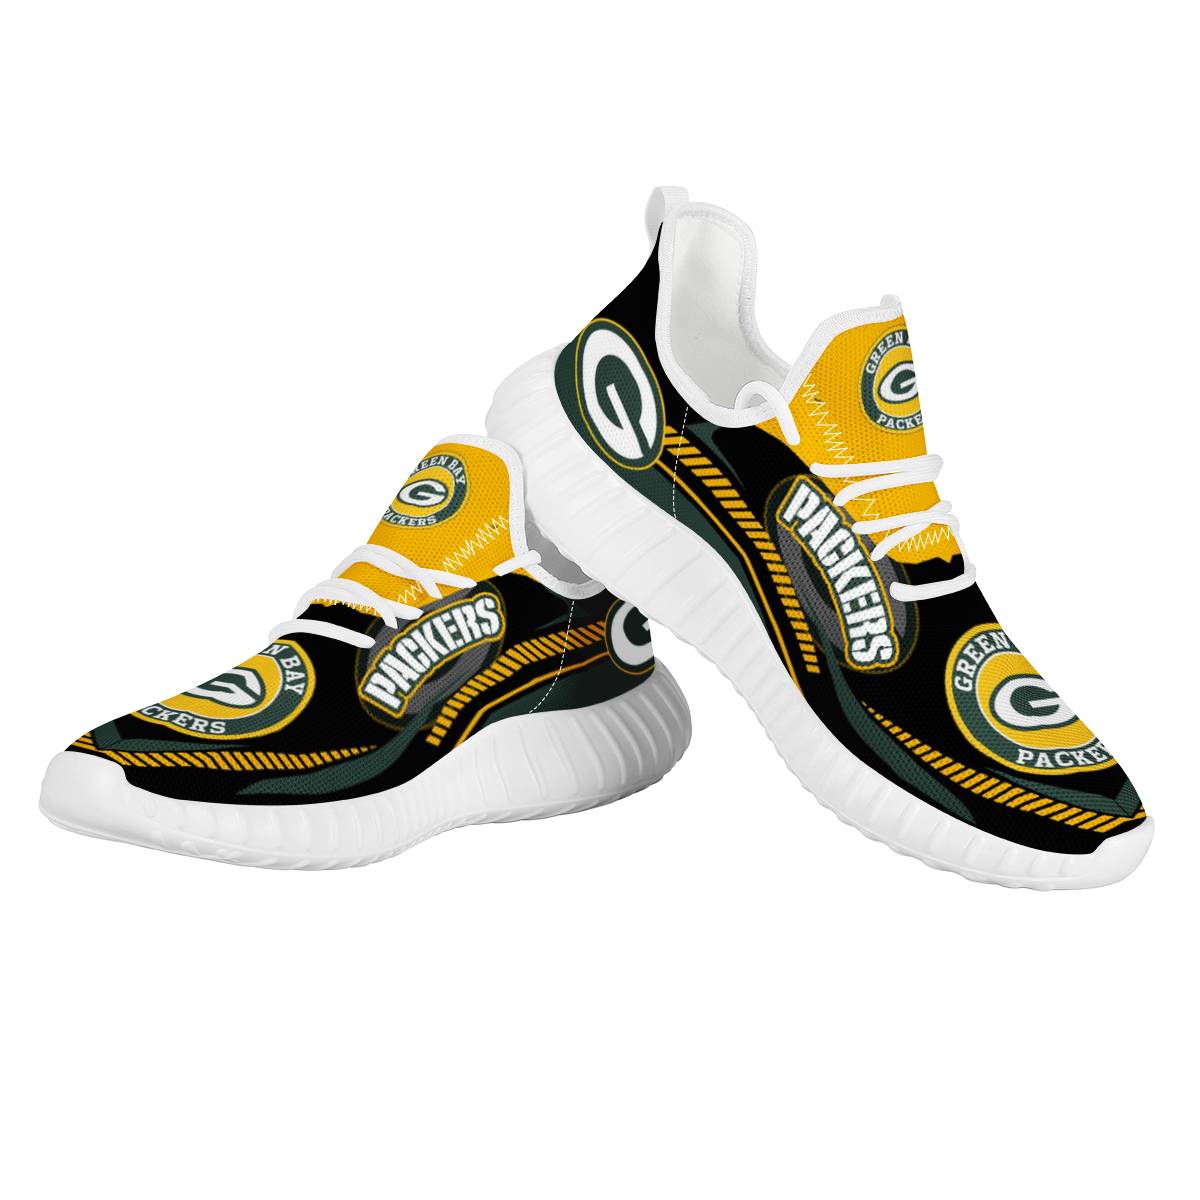 Men's Green Bay Packers Mesh Knit Sneakers/Shoes 005